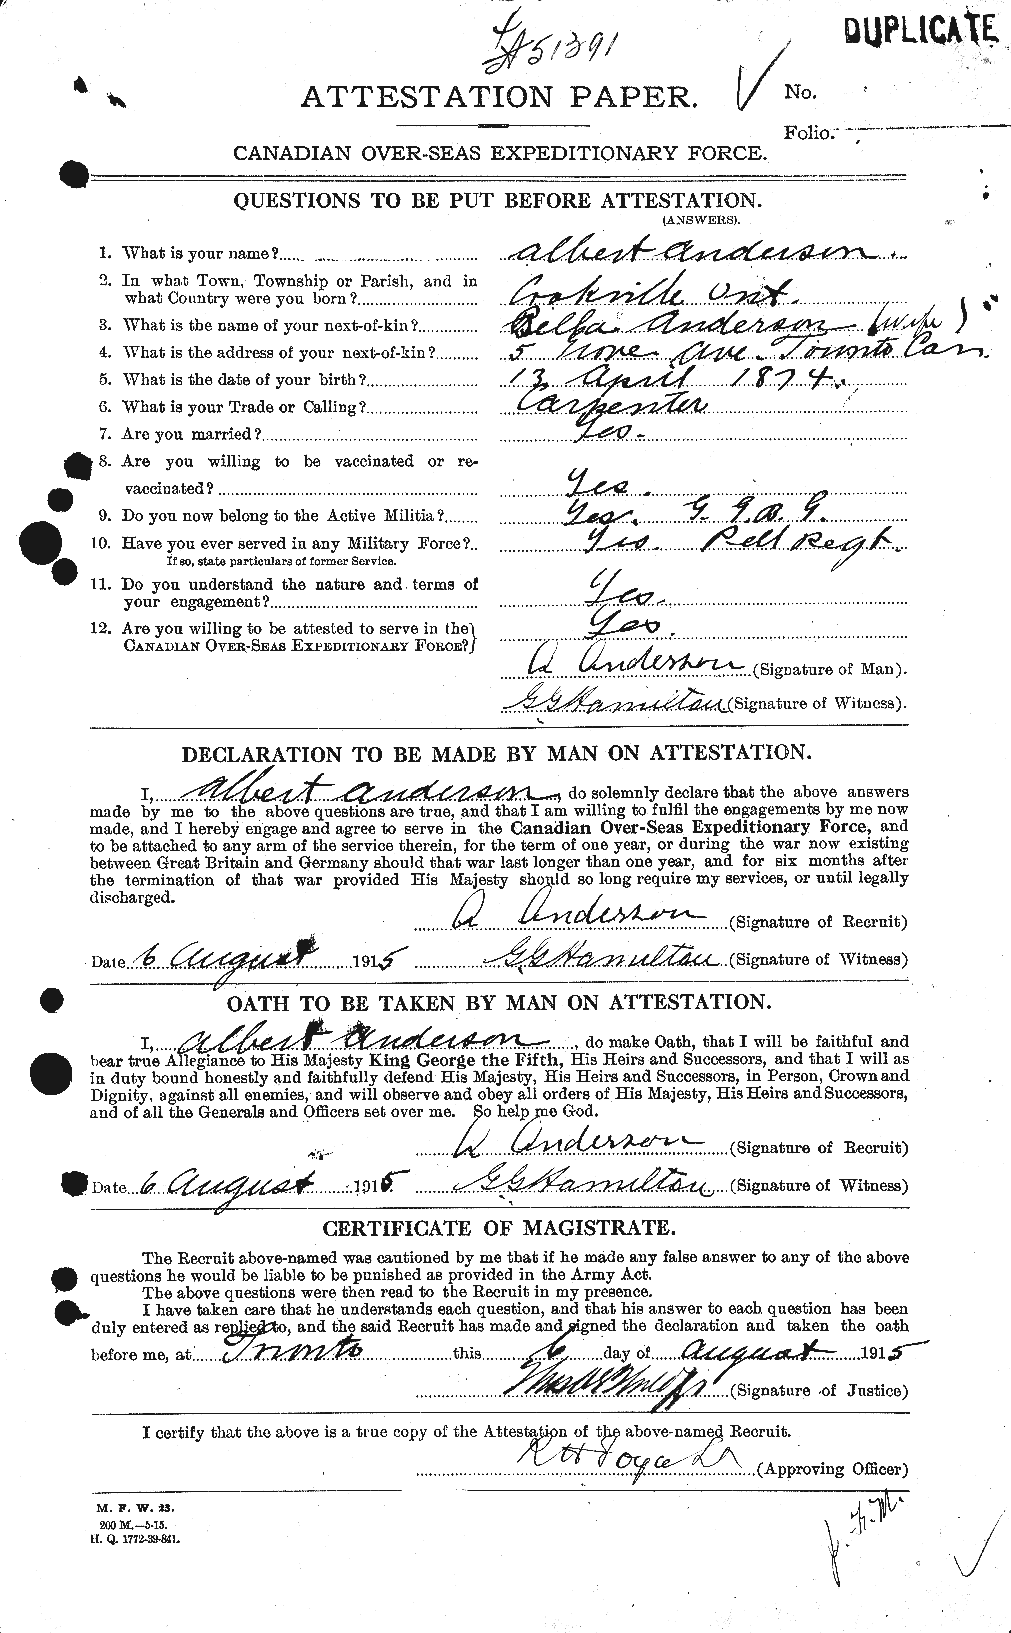 Personnel Records of the First World War - CEF 209563a